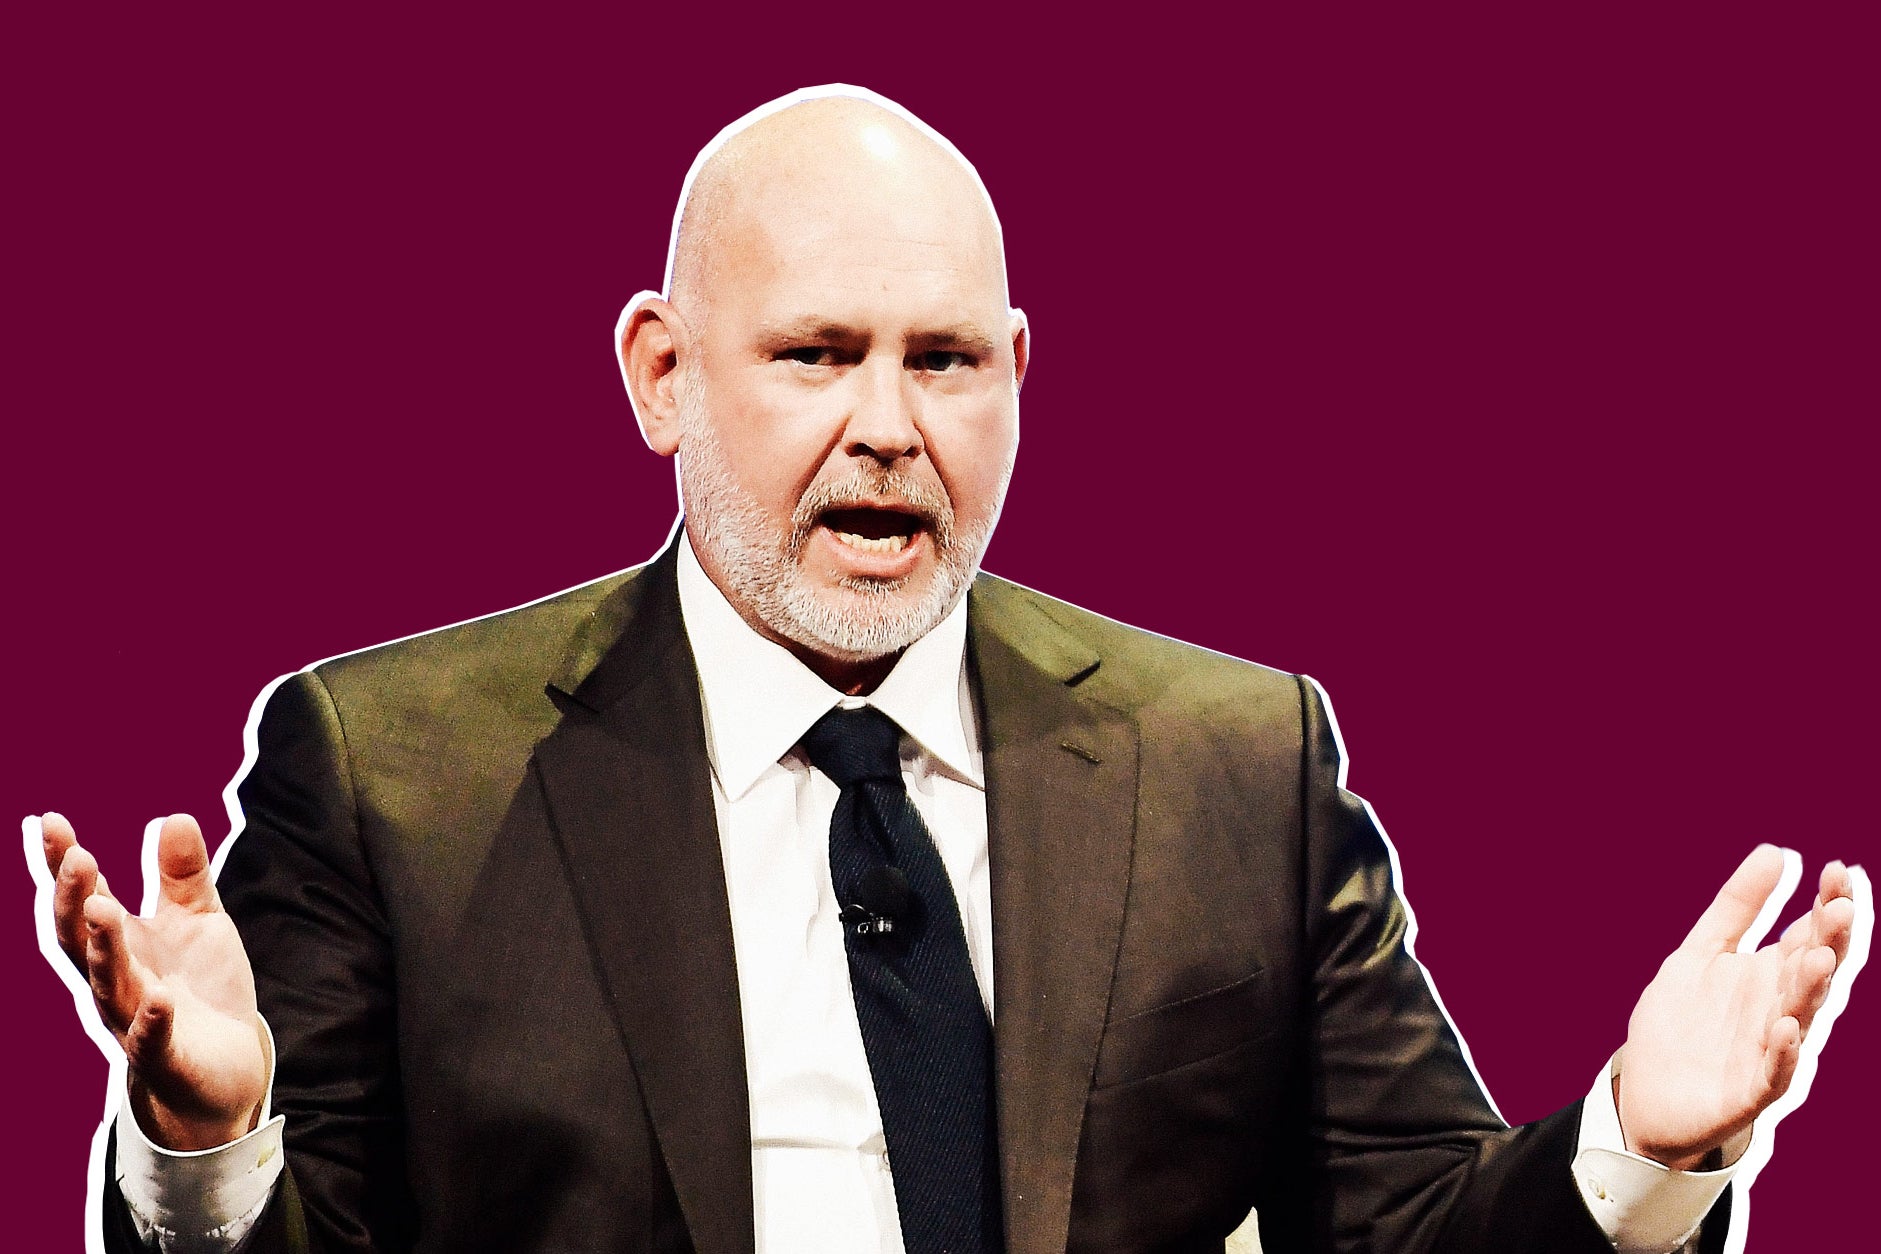 Steve Schmidt and Words Matter what happened and why he stormed off.